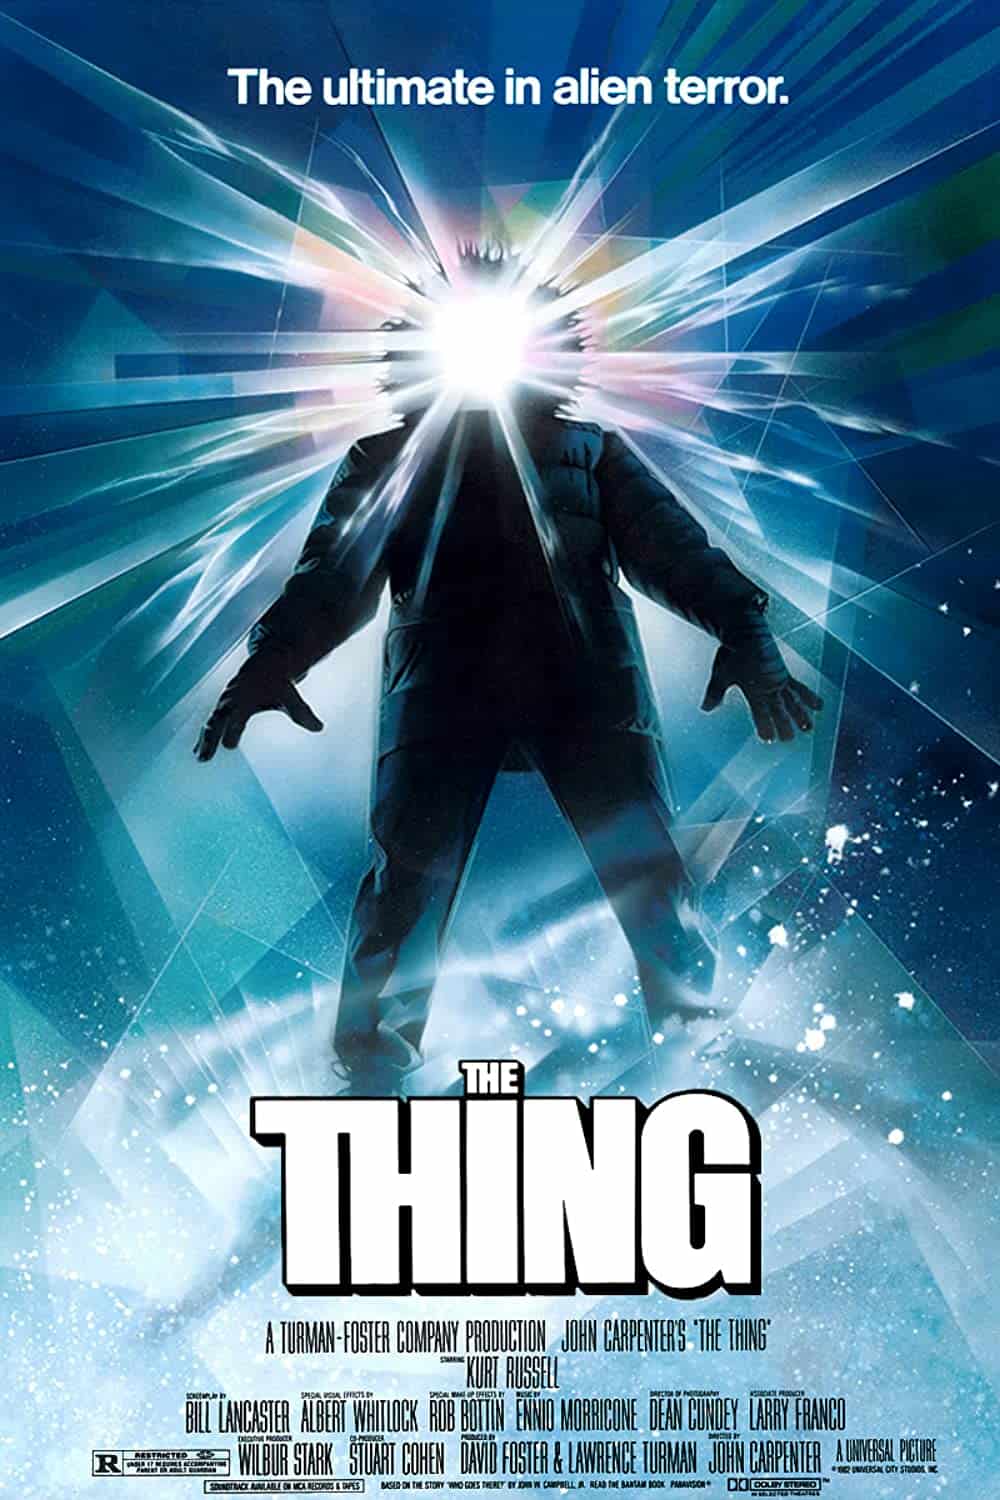 The Thing (1982) 13 Best Body Horror Movies to Add in Your Watchlist